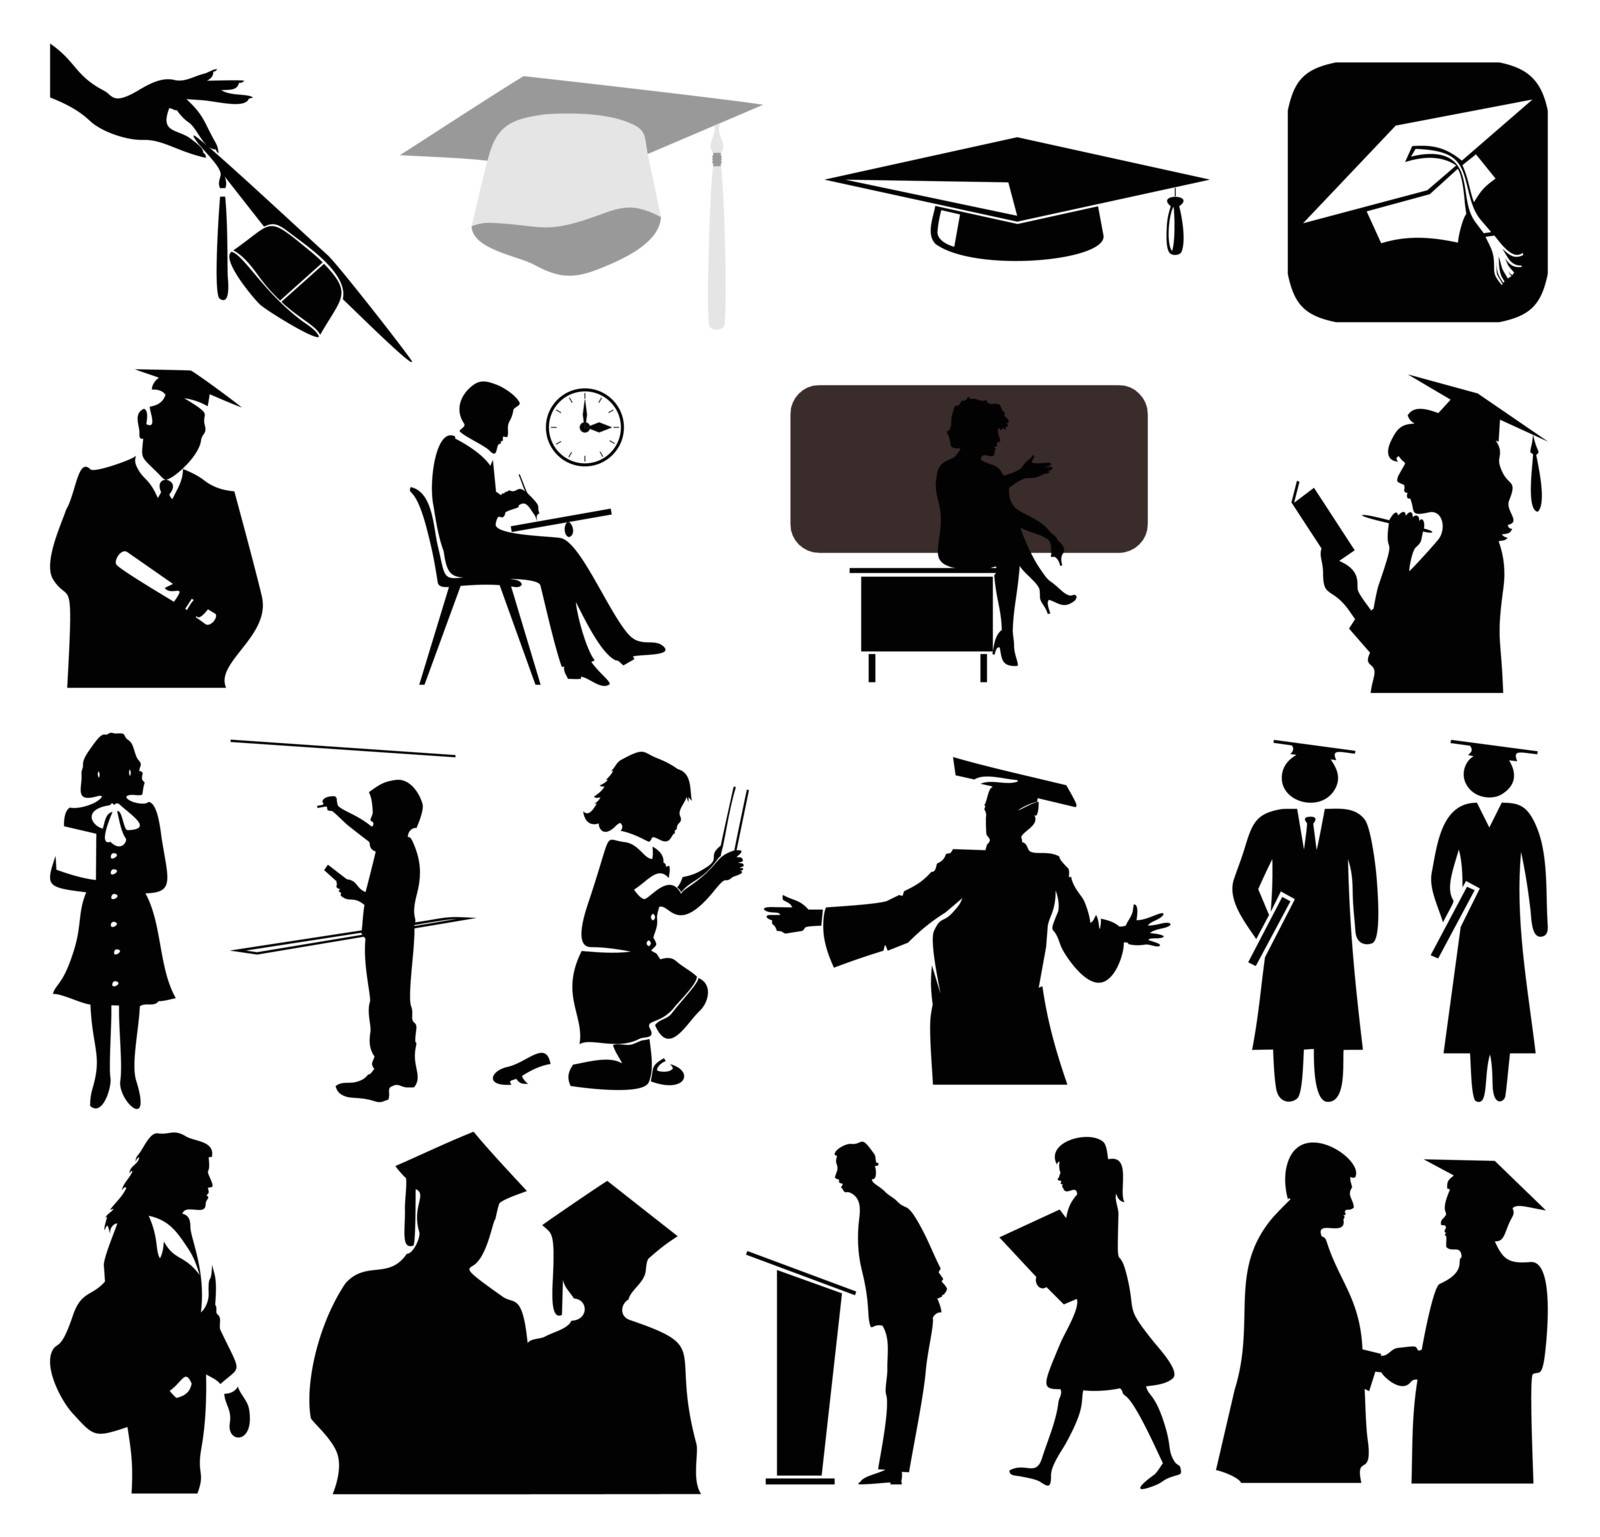 Silhouettes on a theme school education. A vector illustration